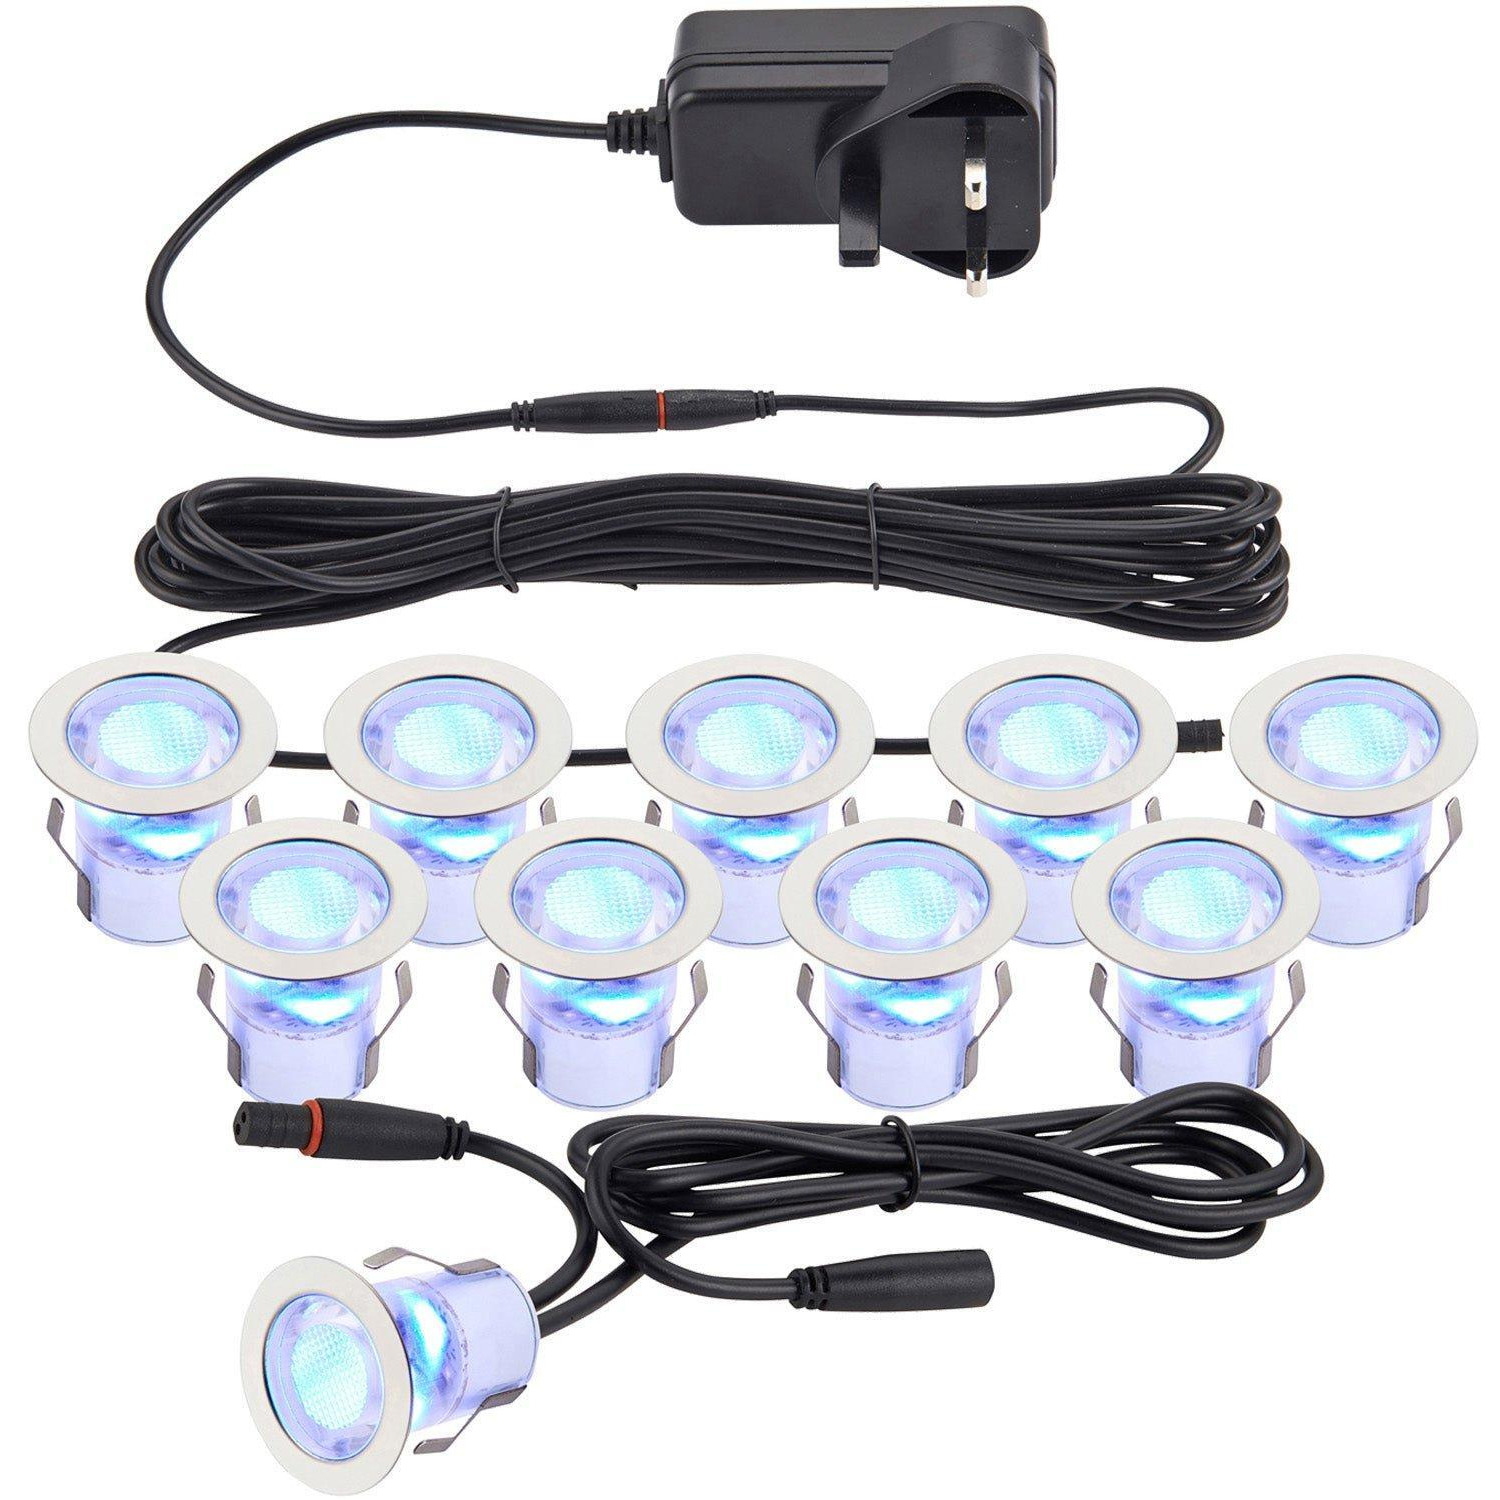 Recessed IP44 Decking Guide Light Kit - 10 x Blue Light LED - Stainless Steel - image 1